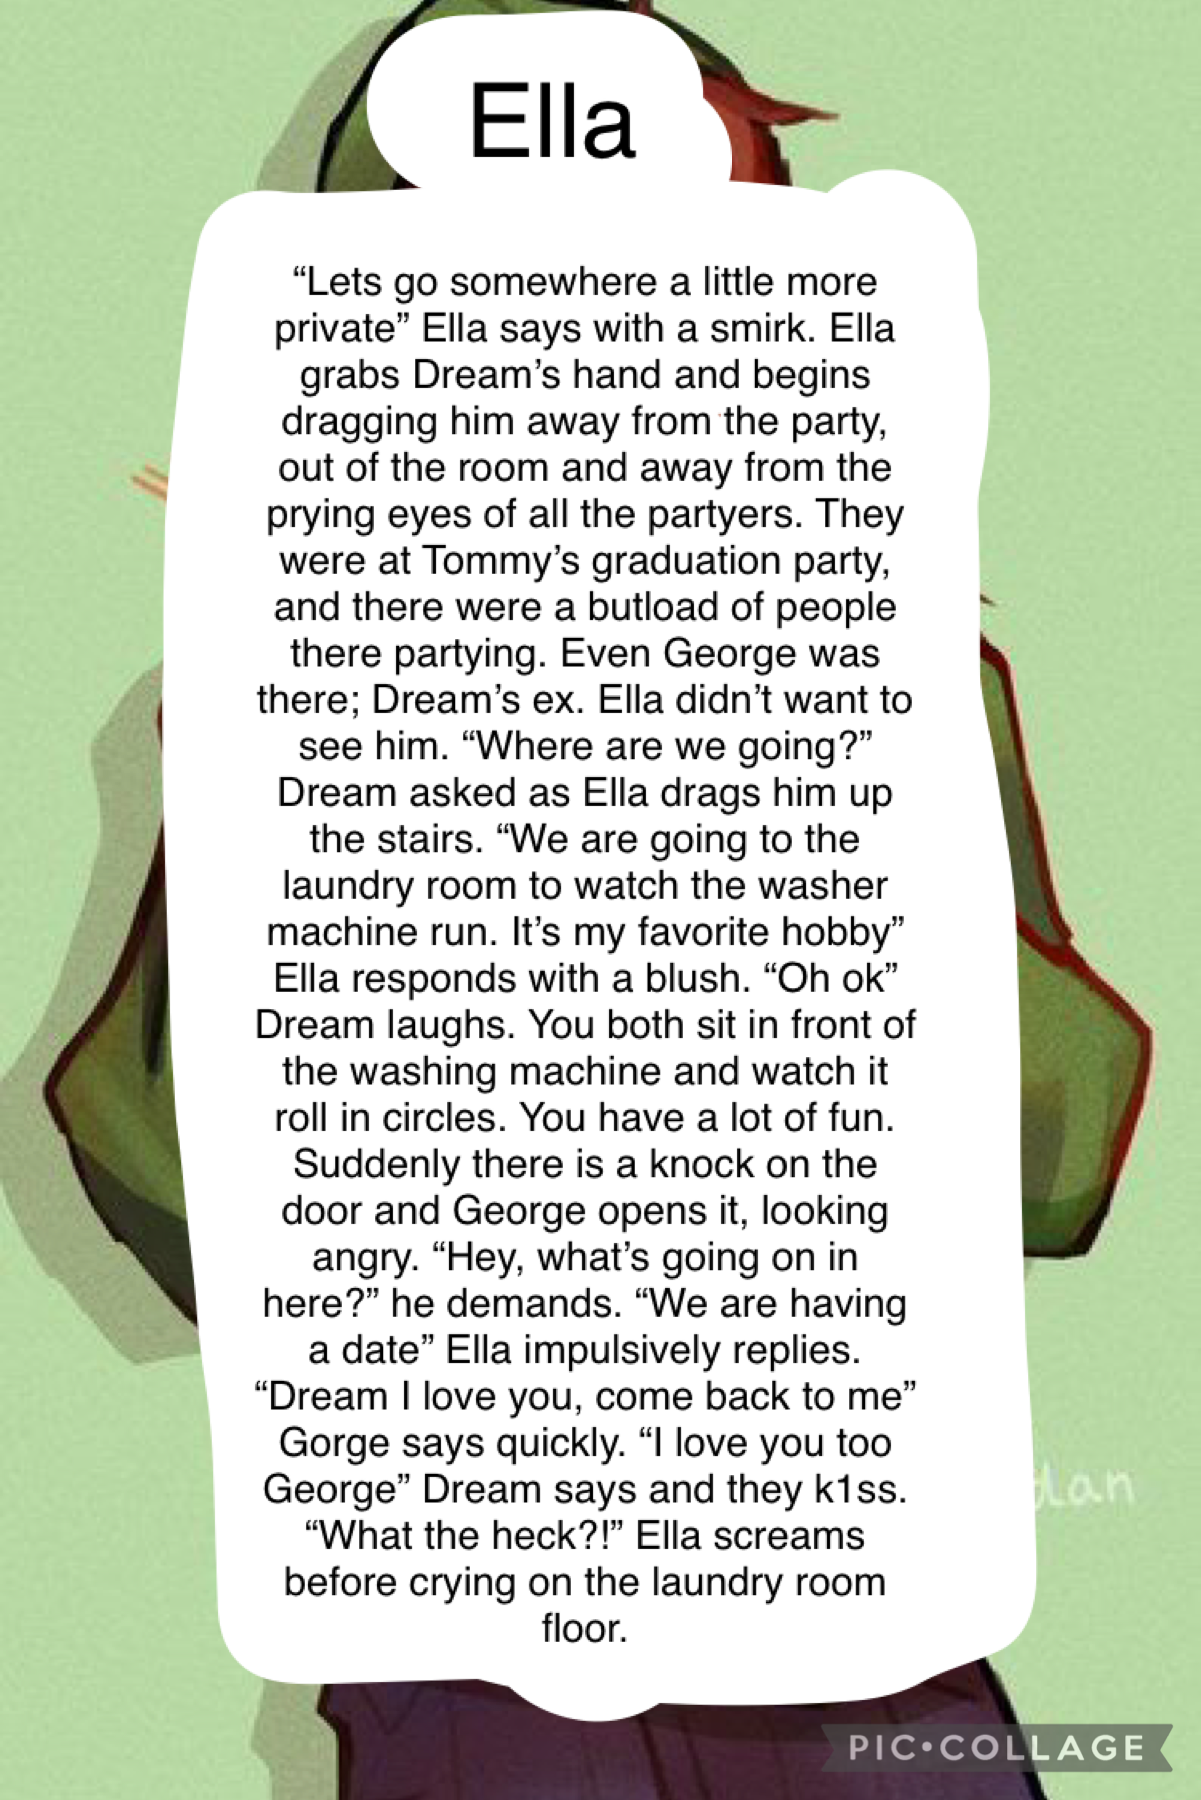 Story for Ella! Hope you like it.
A little mash-up betwen DNF and Y/N stories LOL 